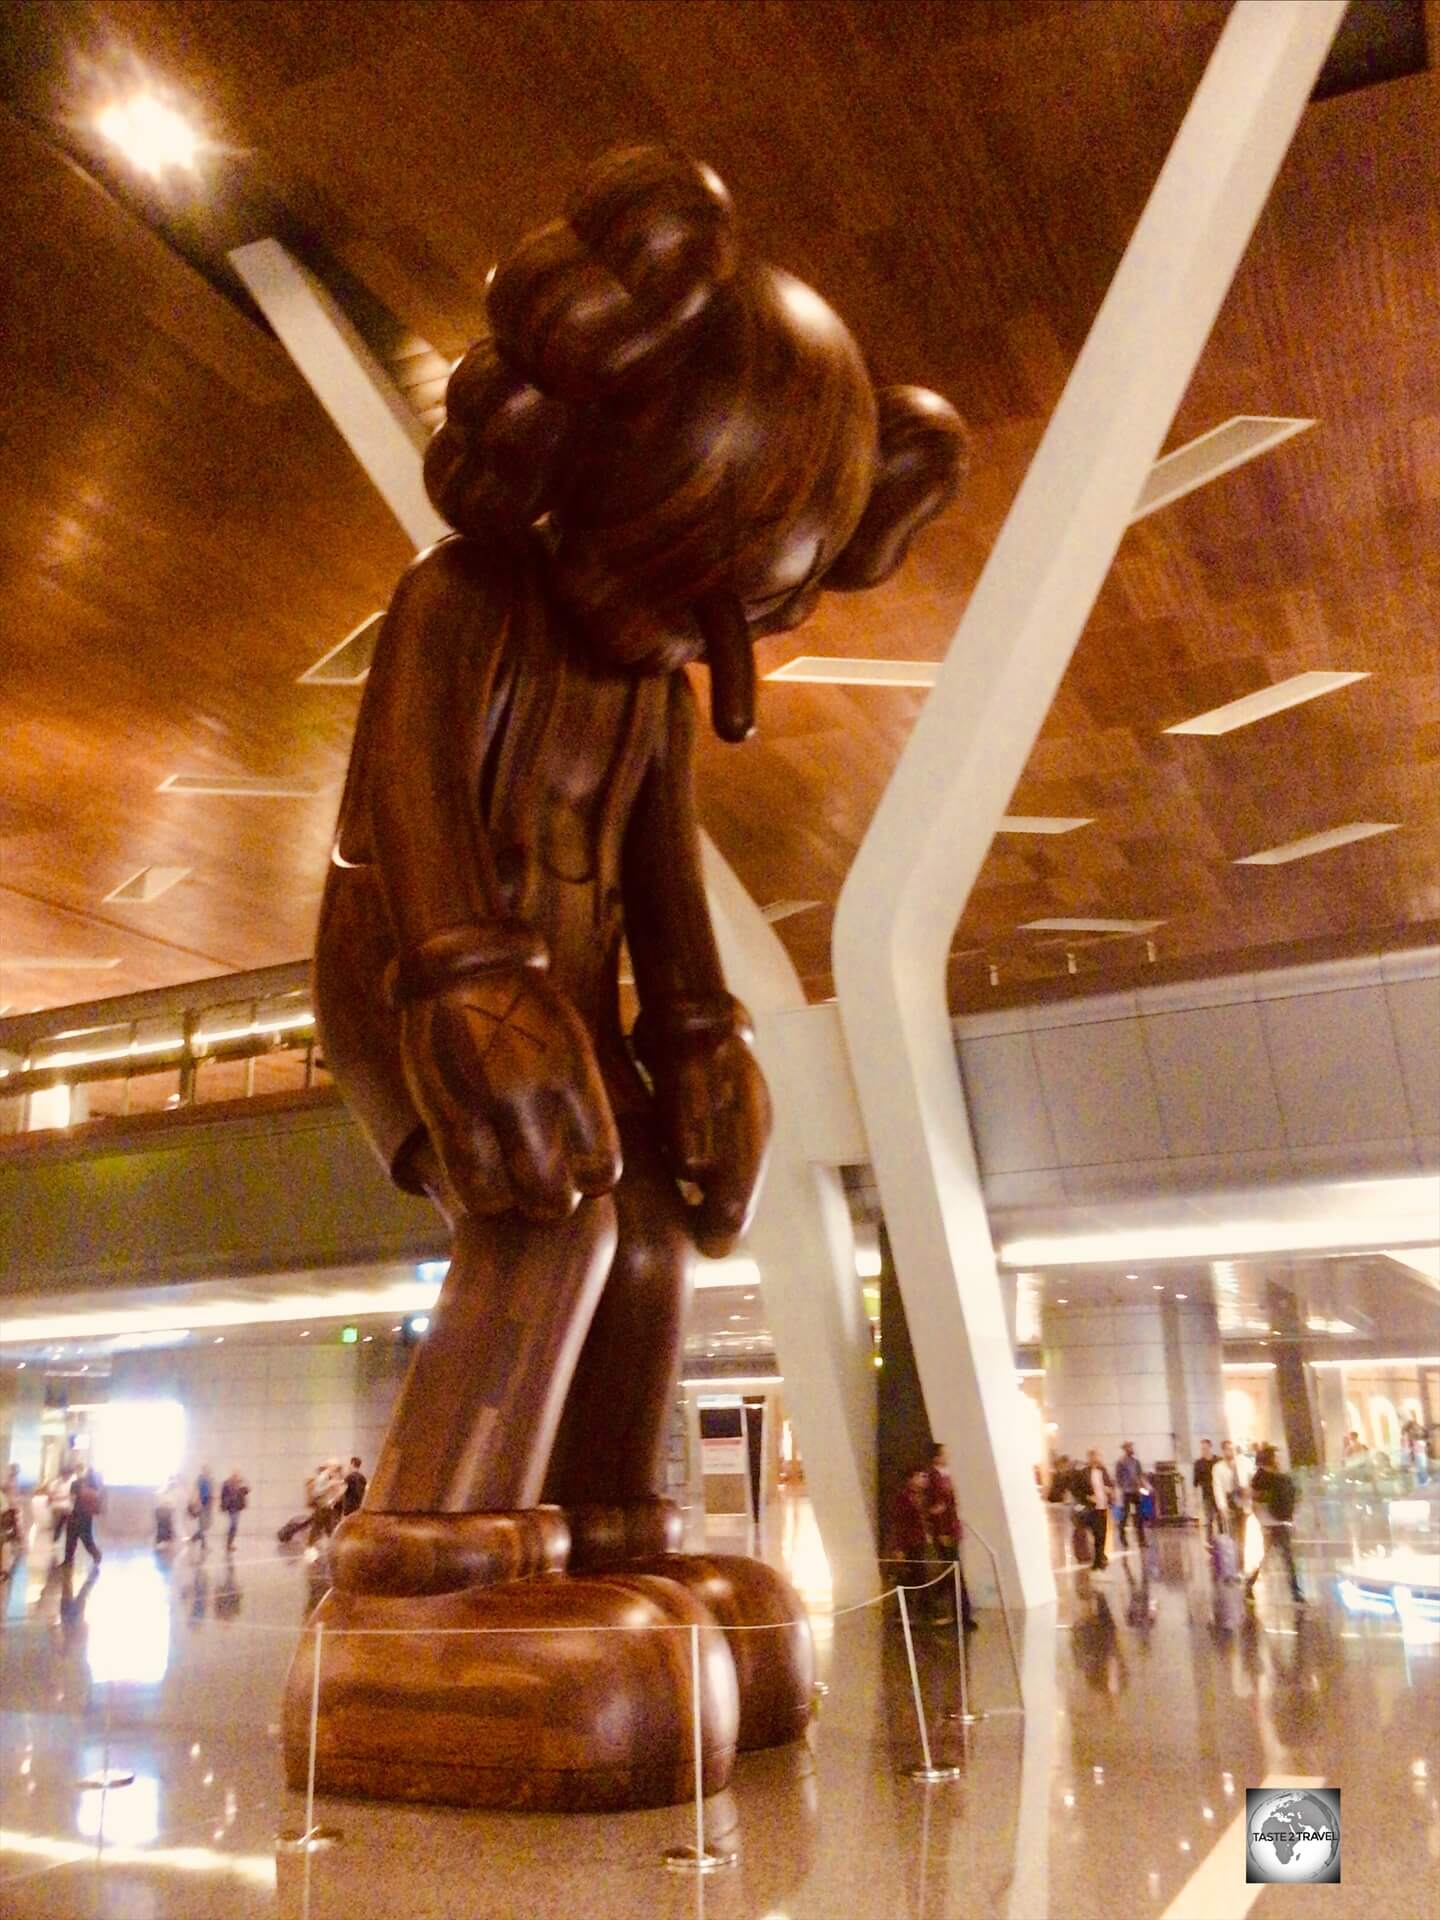 One of the many impressive artworks at Doha International Airport - the 32 feet tall 'Small Lie' is the work of American artist KAWS.